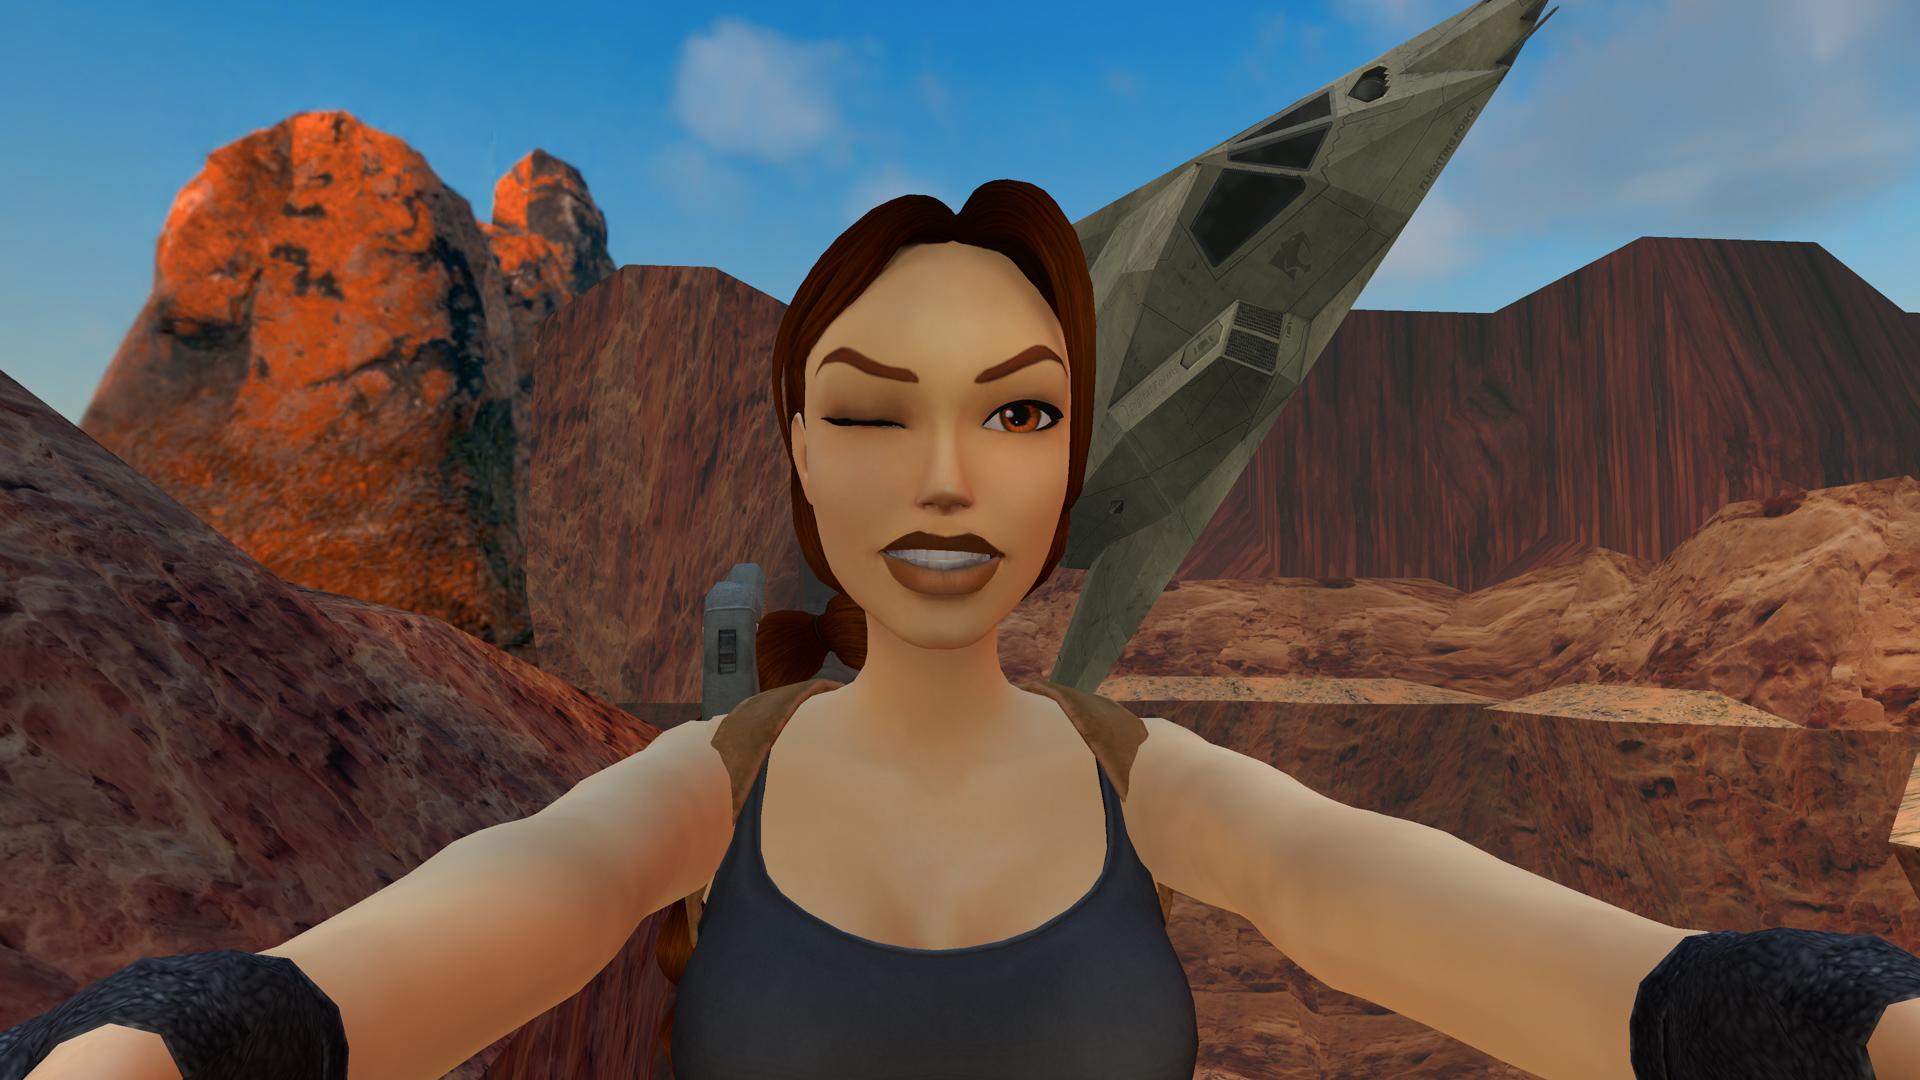 Lara Croft and an aircraft with the Saber logo in Nevada